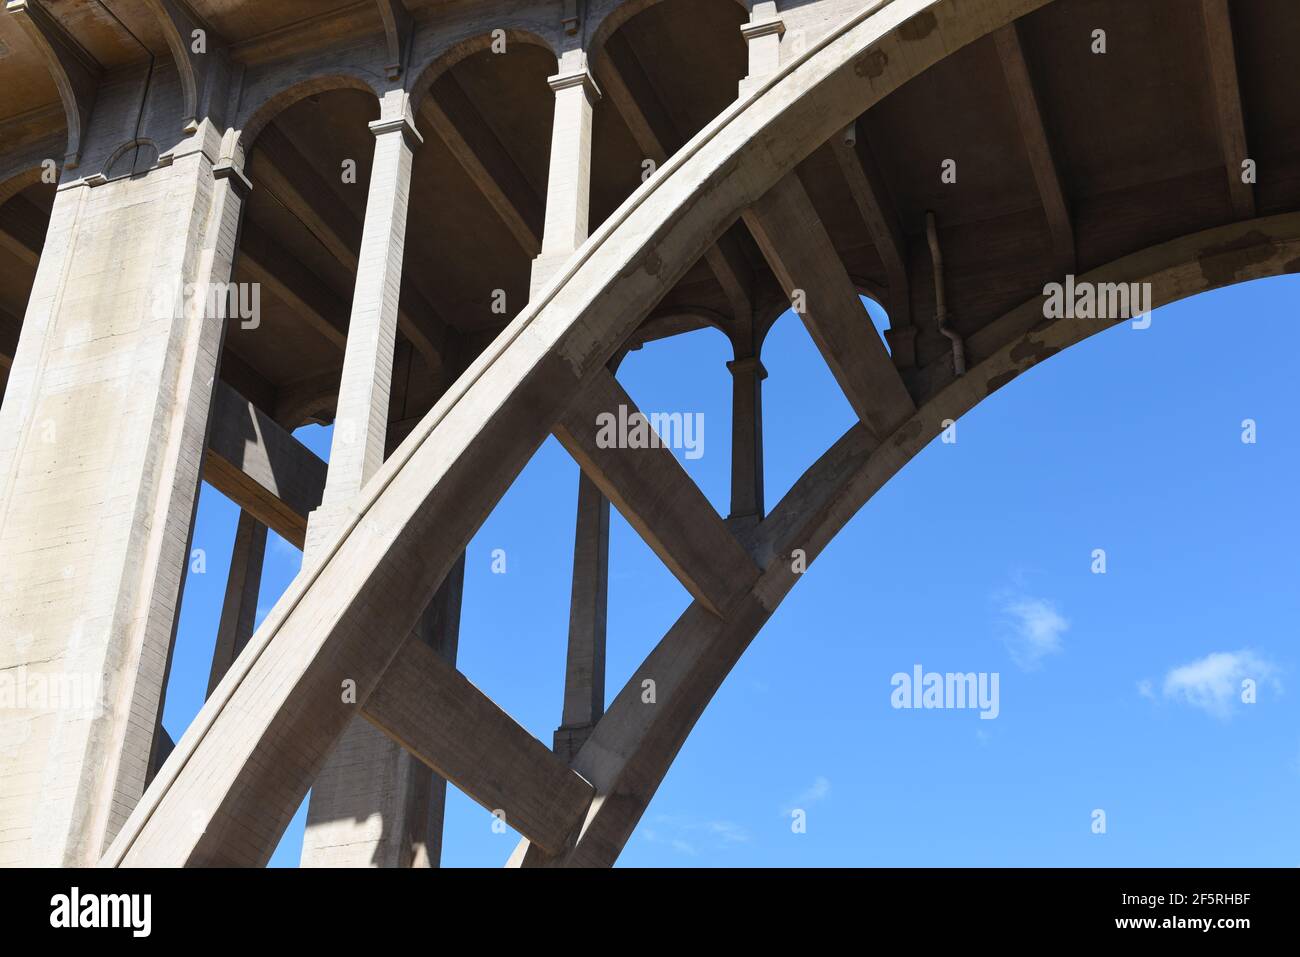 PASADENA, CALIFORNIA - 26 MAR 2021: Closeup detail of the Colorado Street Bridge. The Beaux Arts style structure is on the National Register of Histor Stock Photo